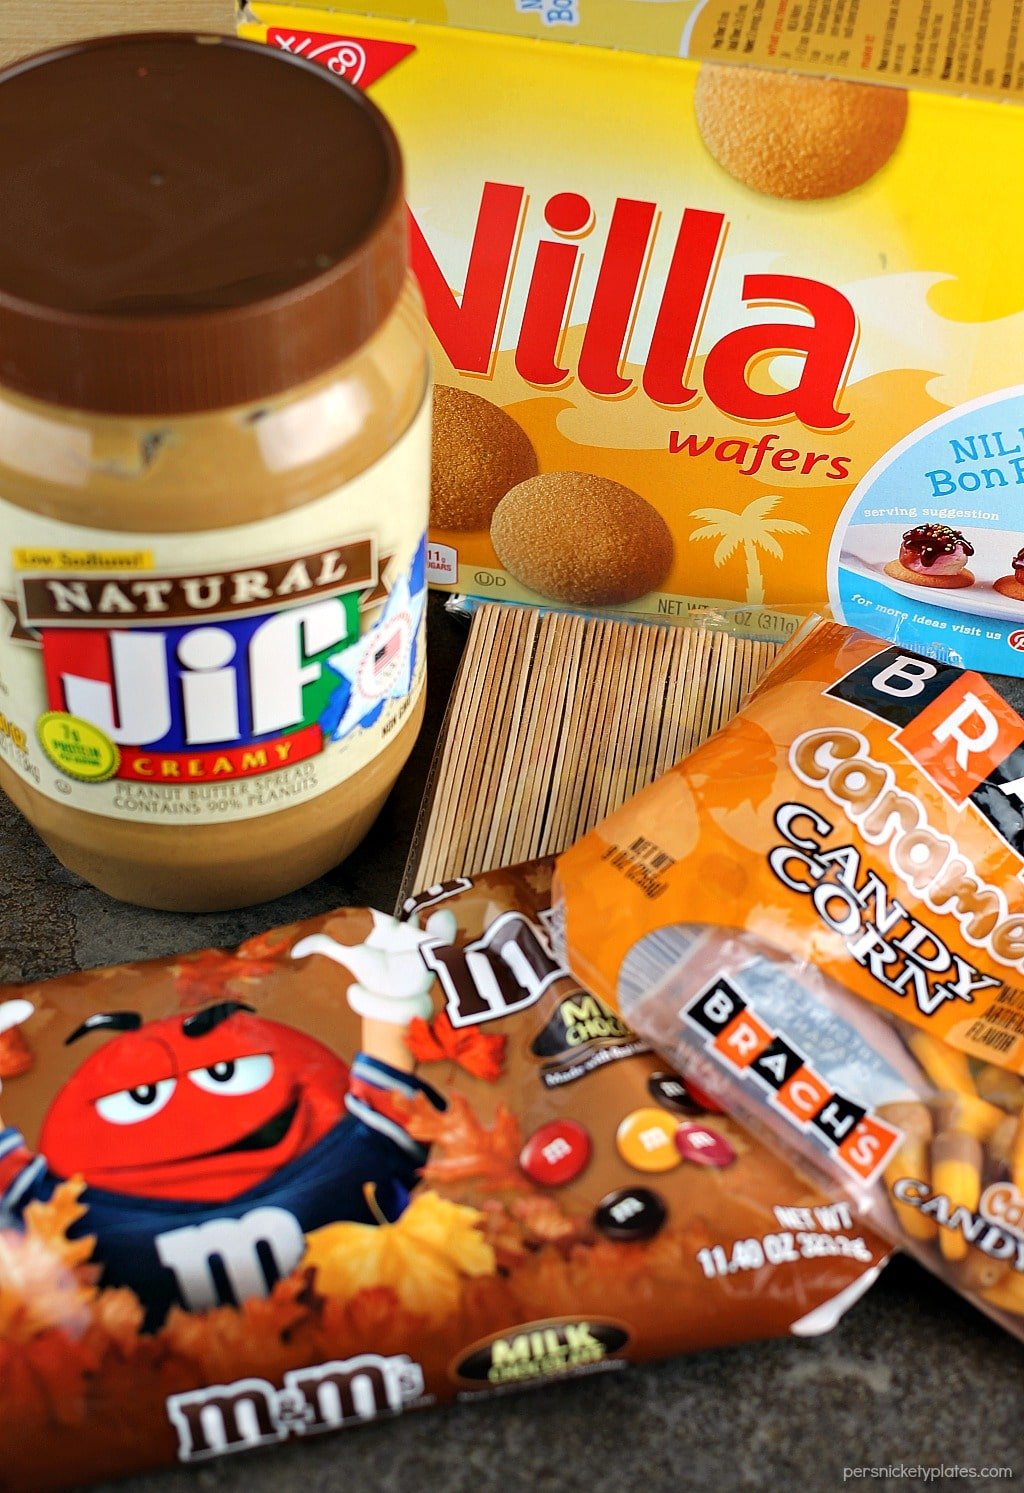 Nilla Wafer Thanksgiving Turkeys are cookies sandwiched together with peanut butter, dipped in chocolate, and decorated with fall colored M&Ms, candy corn, and candy eyes, all on a popsicle stick! So fun for the kids and festive for the Thanksgiving table!